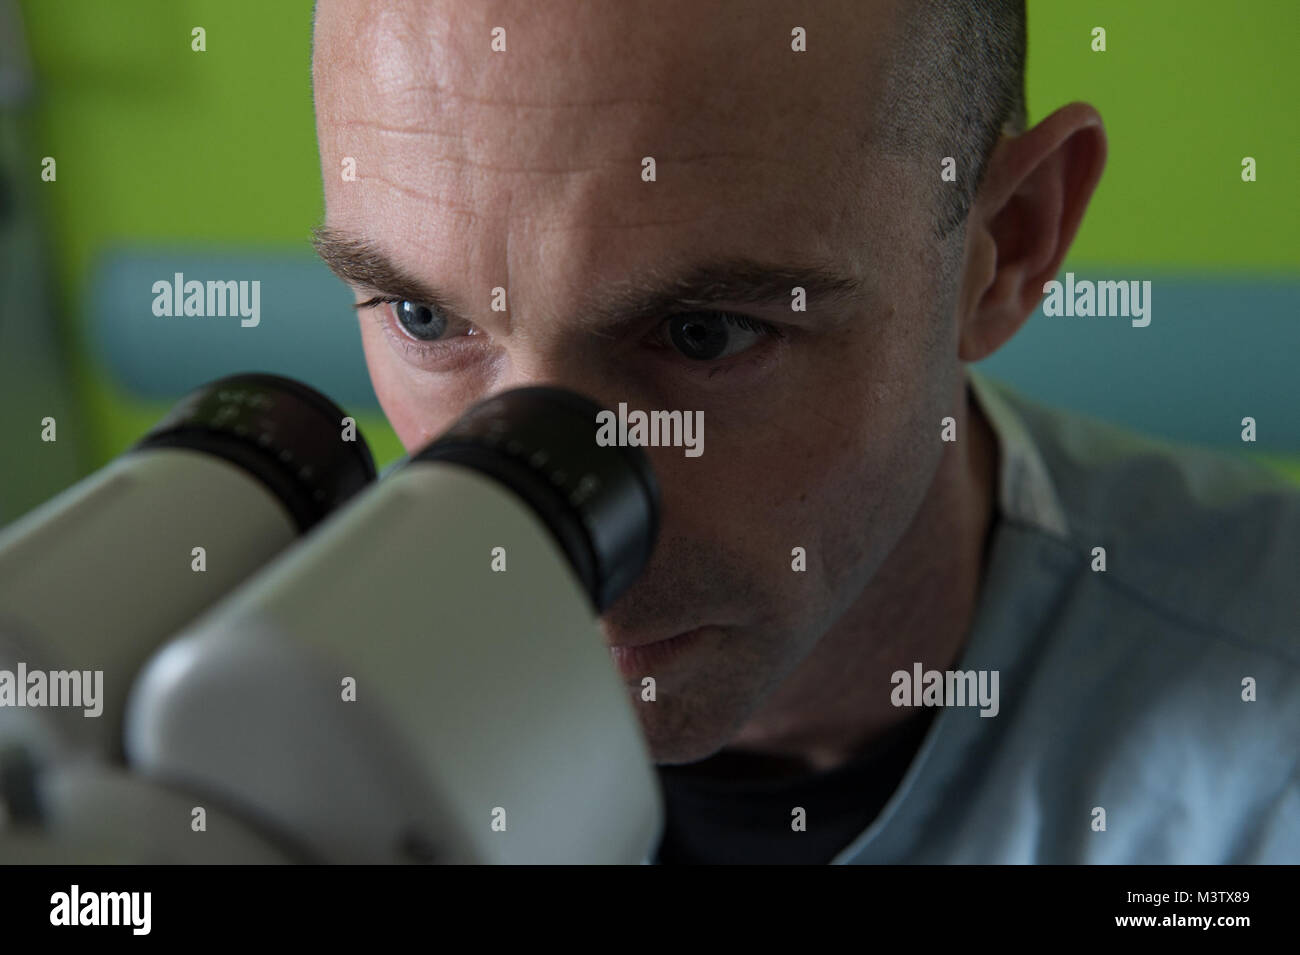 Maj. Brett Davies, an ocular trauma and plastic surgeon, looks through a microscope at the Centro Hospitalario Luis 'Chicho' Fabrega during a medical readiness training exercise in Santiago, Panama, Feb. 7, 2017. The U.S. military medical team was in Panama to help treat individuals with cataracts that otherwise would have gone untreated. Medical readiness training exercises provide U.S. military personnel training in delivery of medical care in austere conditions, promote diplomatic relations between the U.S. and host nations in Central America and provide humanitarian and civic assistance vi Stock Photo